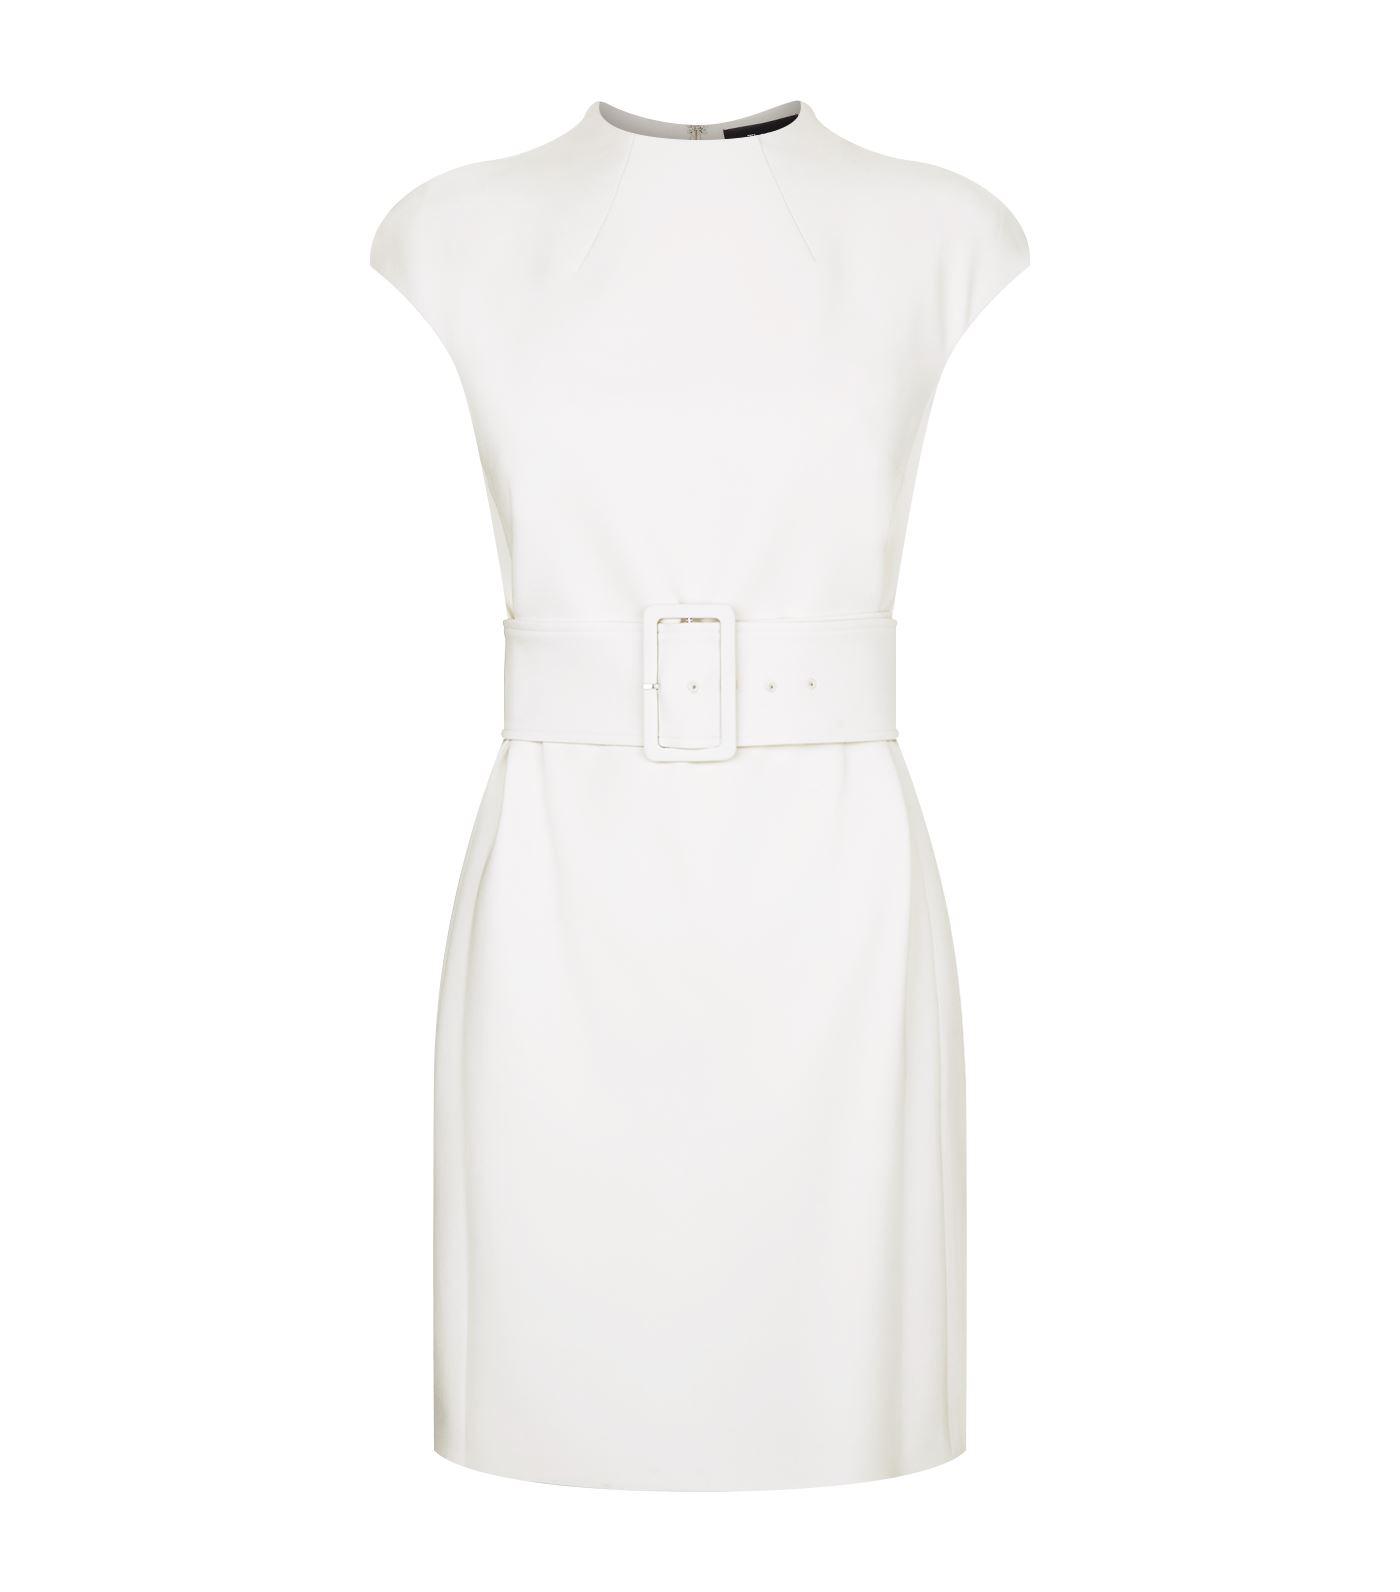 Theory Mod Belted Shift Dress in White - Lyst